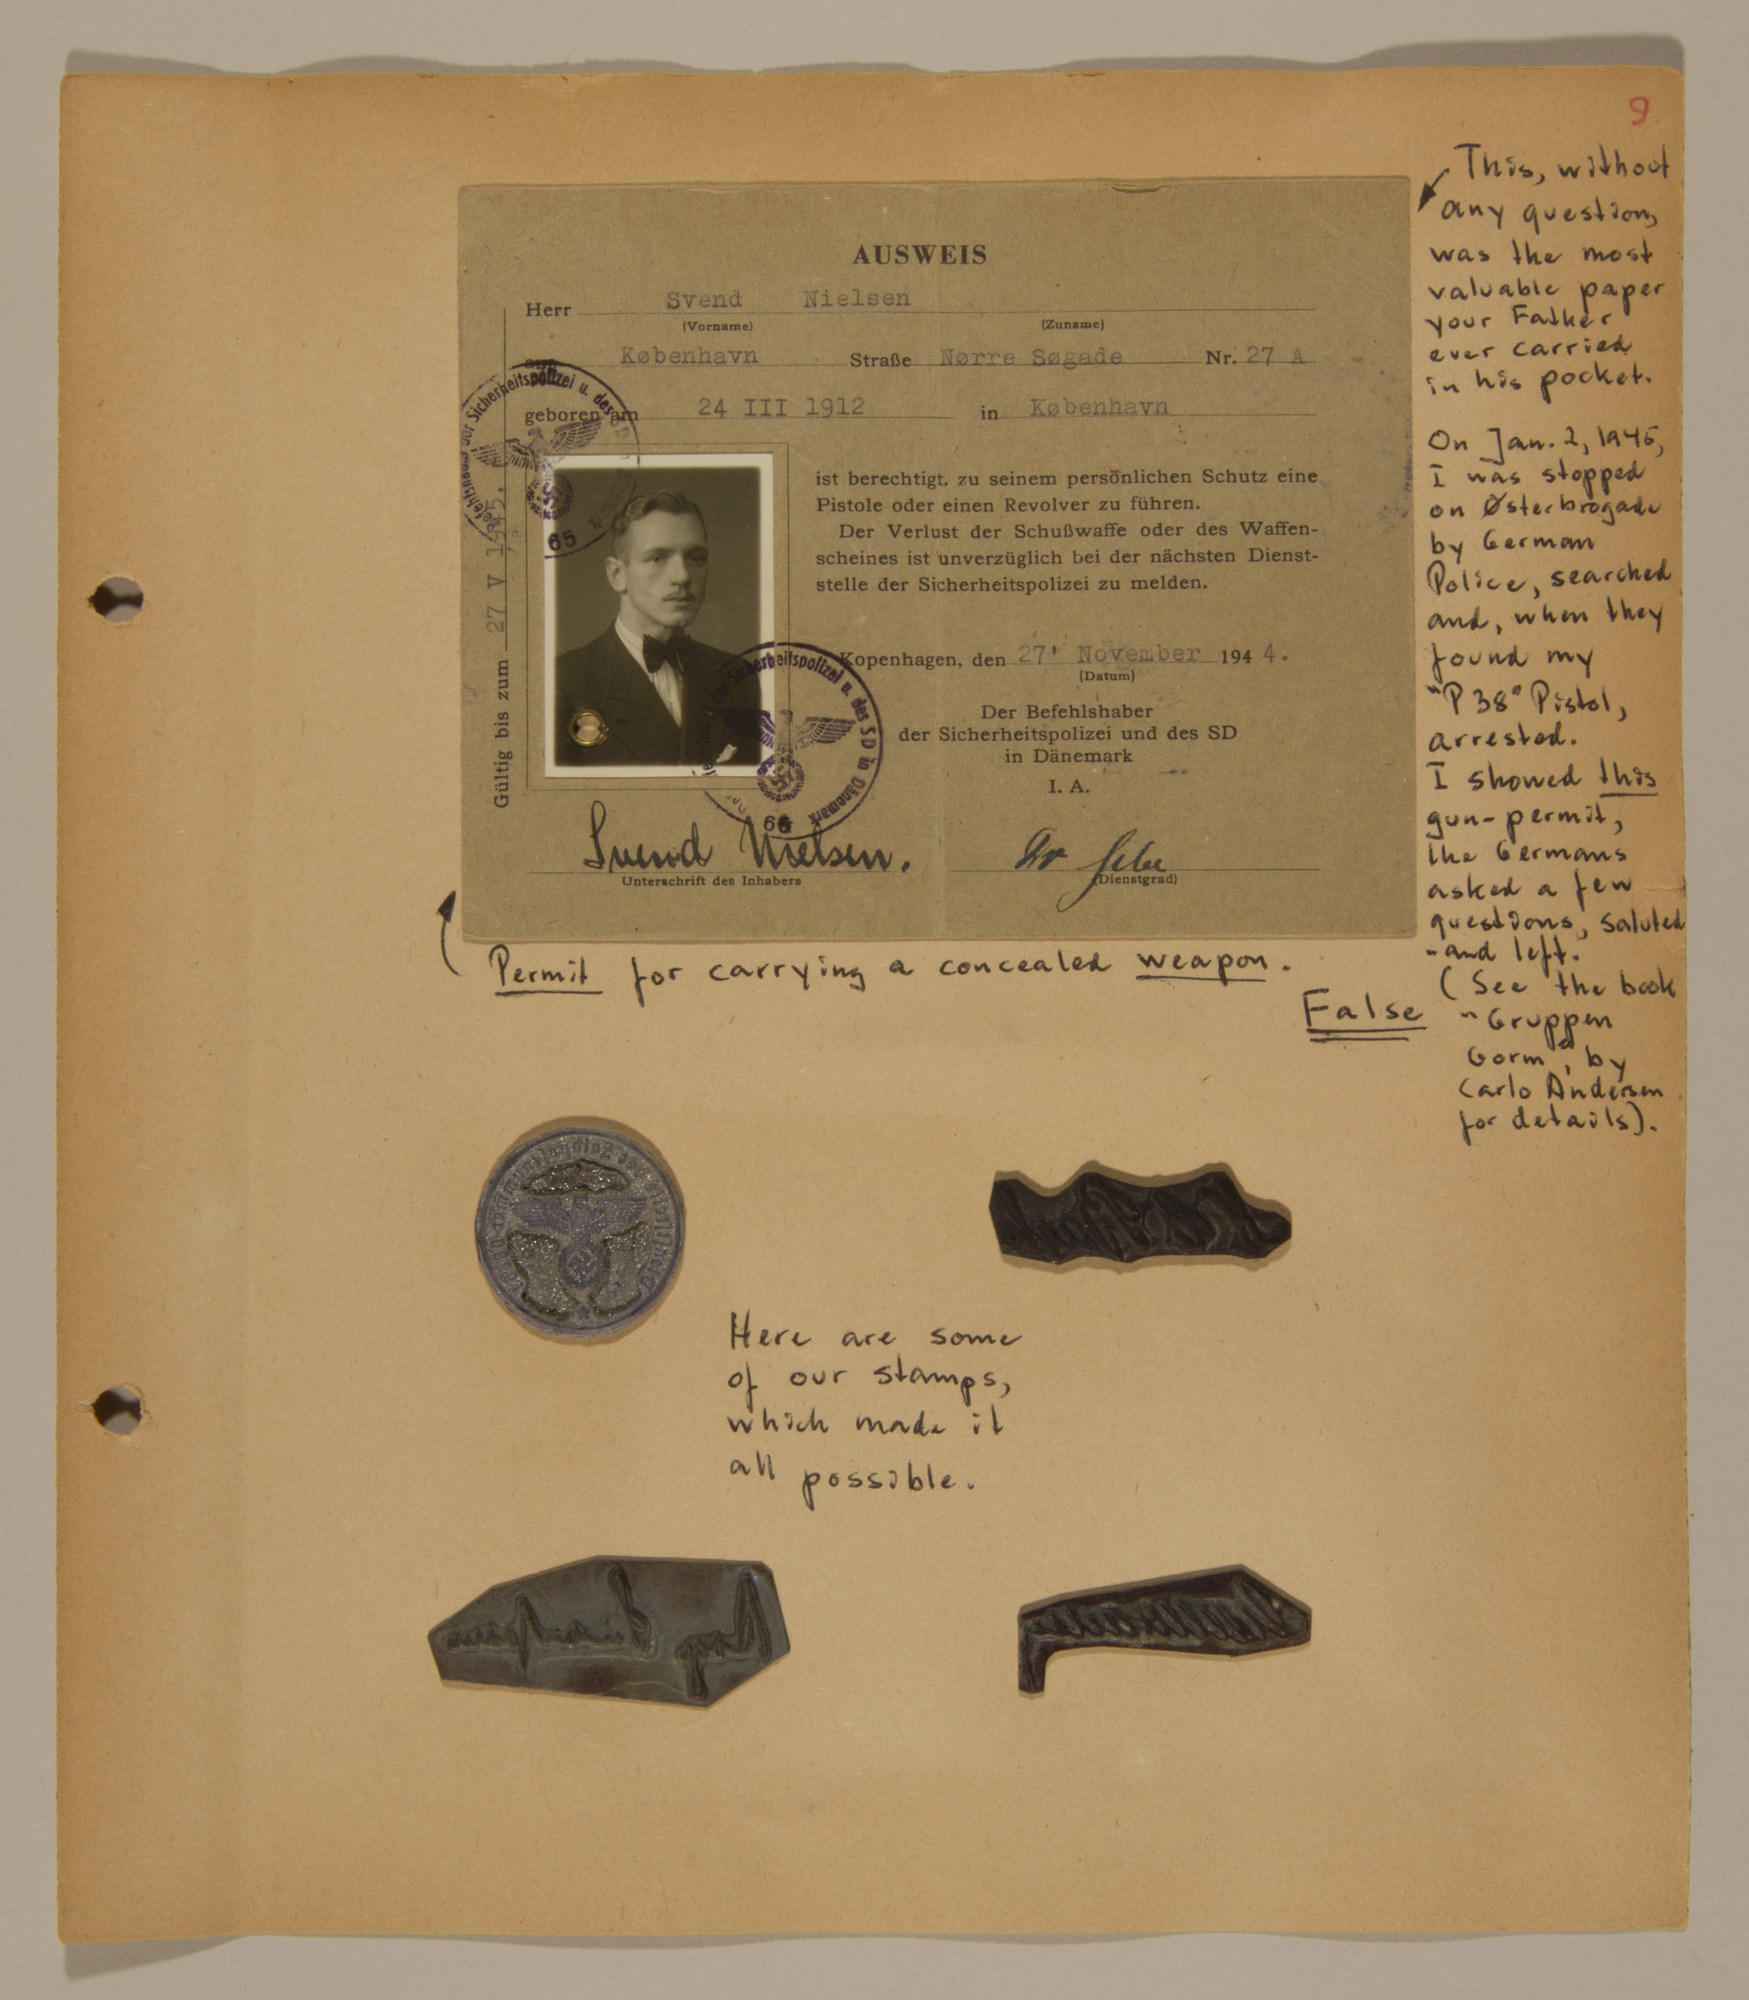 Page from volume three of a set of scrapbooks compiled by Bjorn Sibbern, a Danish policeman and resistance member, documenting the German occupation of Denmark.

This page contains Bjorn Sibbern's (aka Svend Nieslsen's) false permit for carrying a concealed weapon and his forgery stamps.